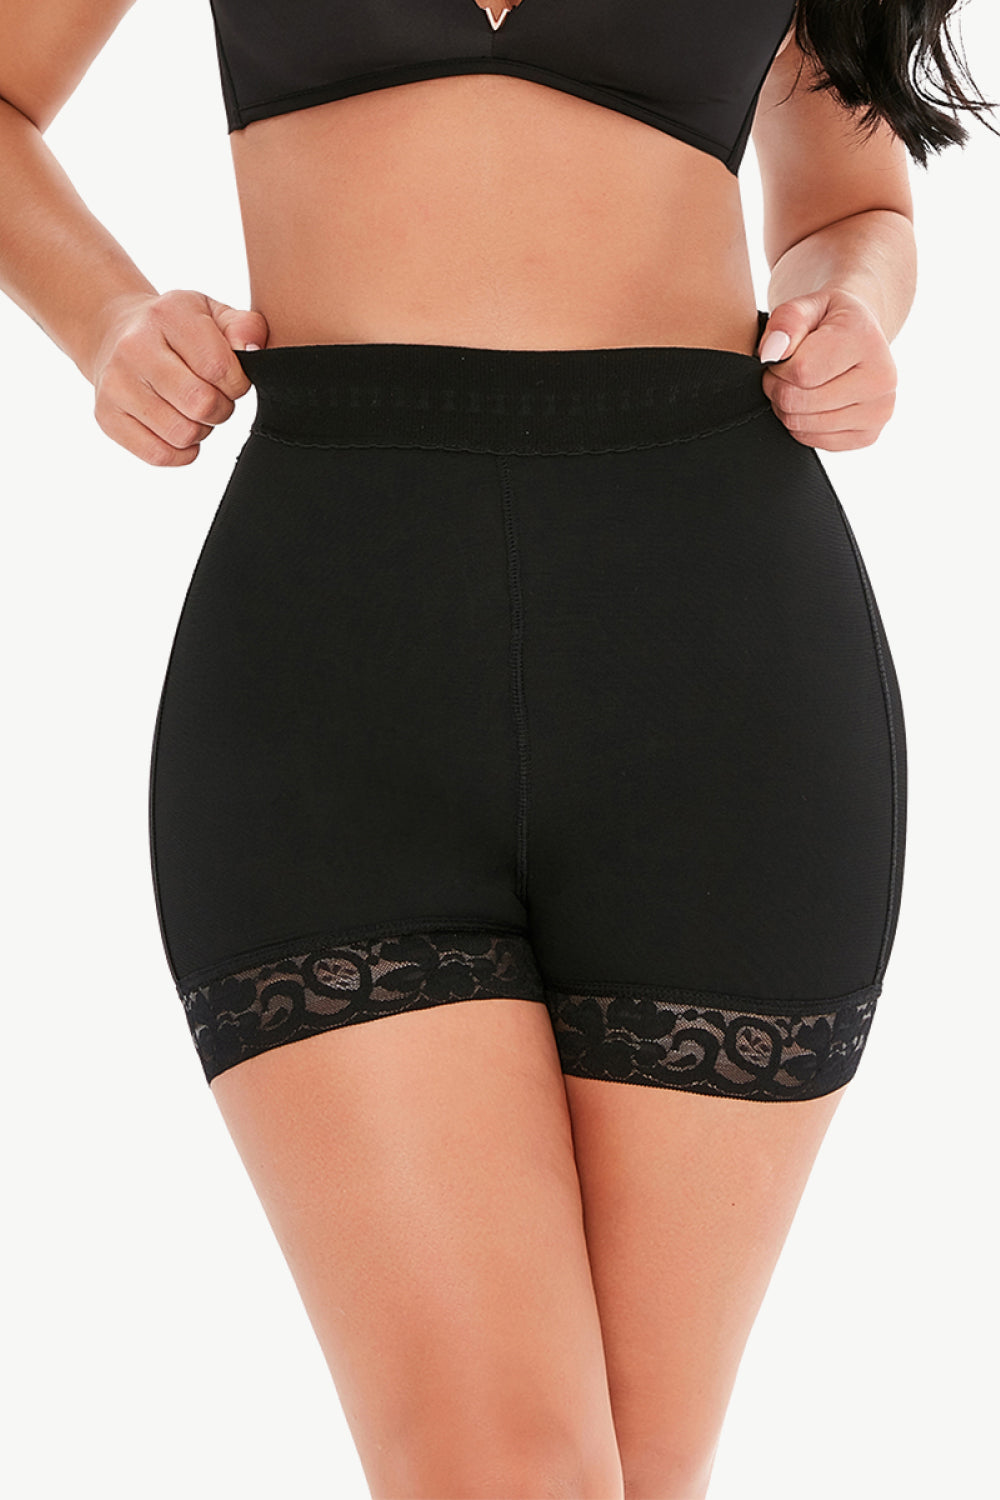 Full Size Pull-On Lace Trim Shaping Shorts - Black / S Wynter 4 All Seasons